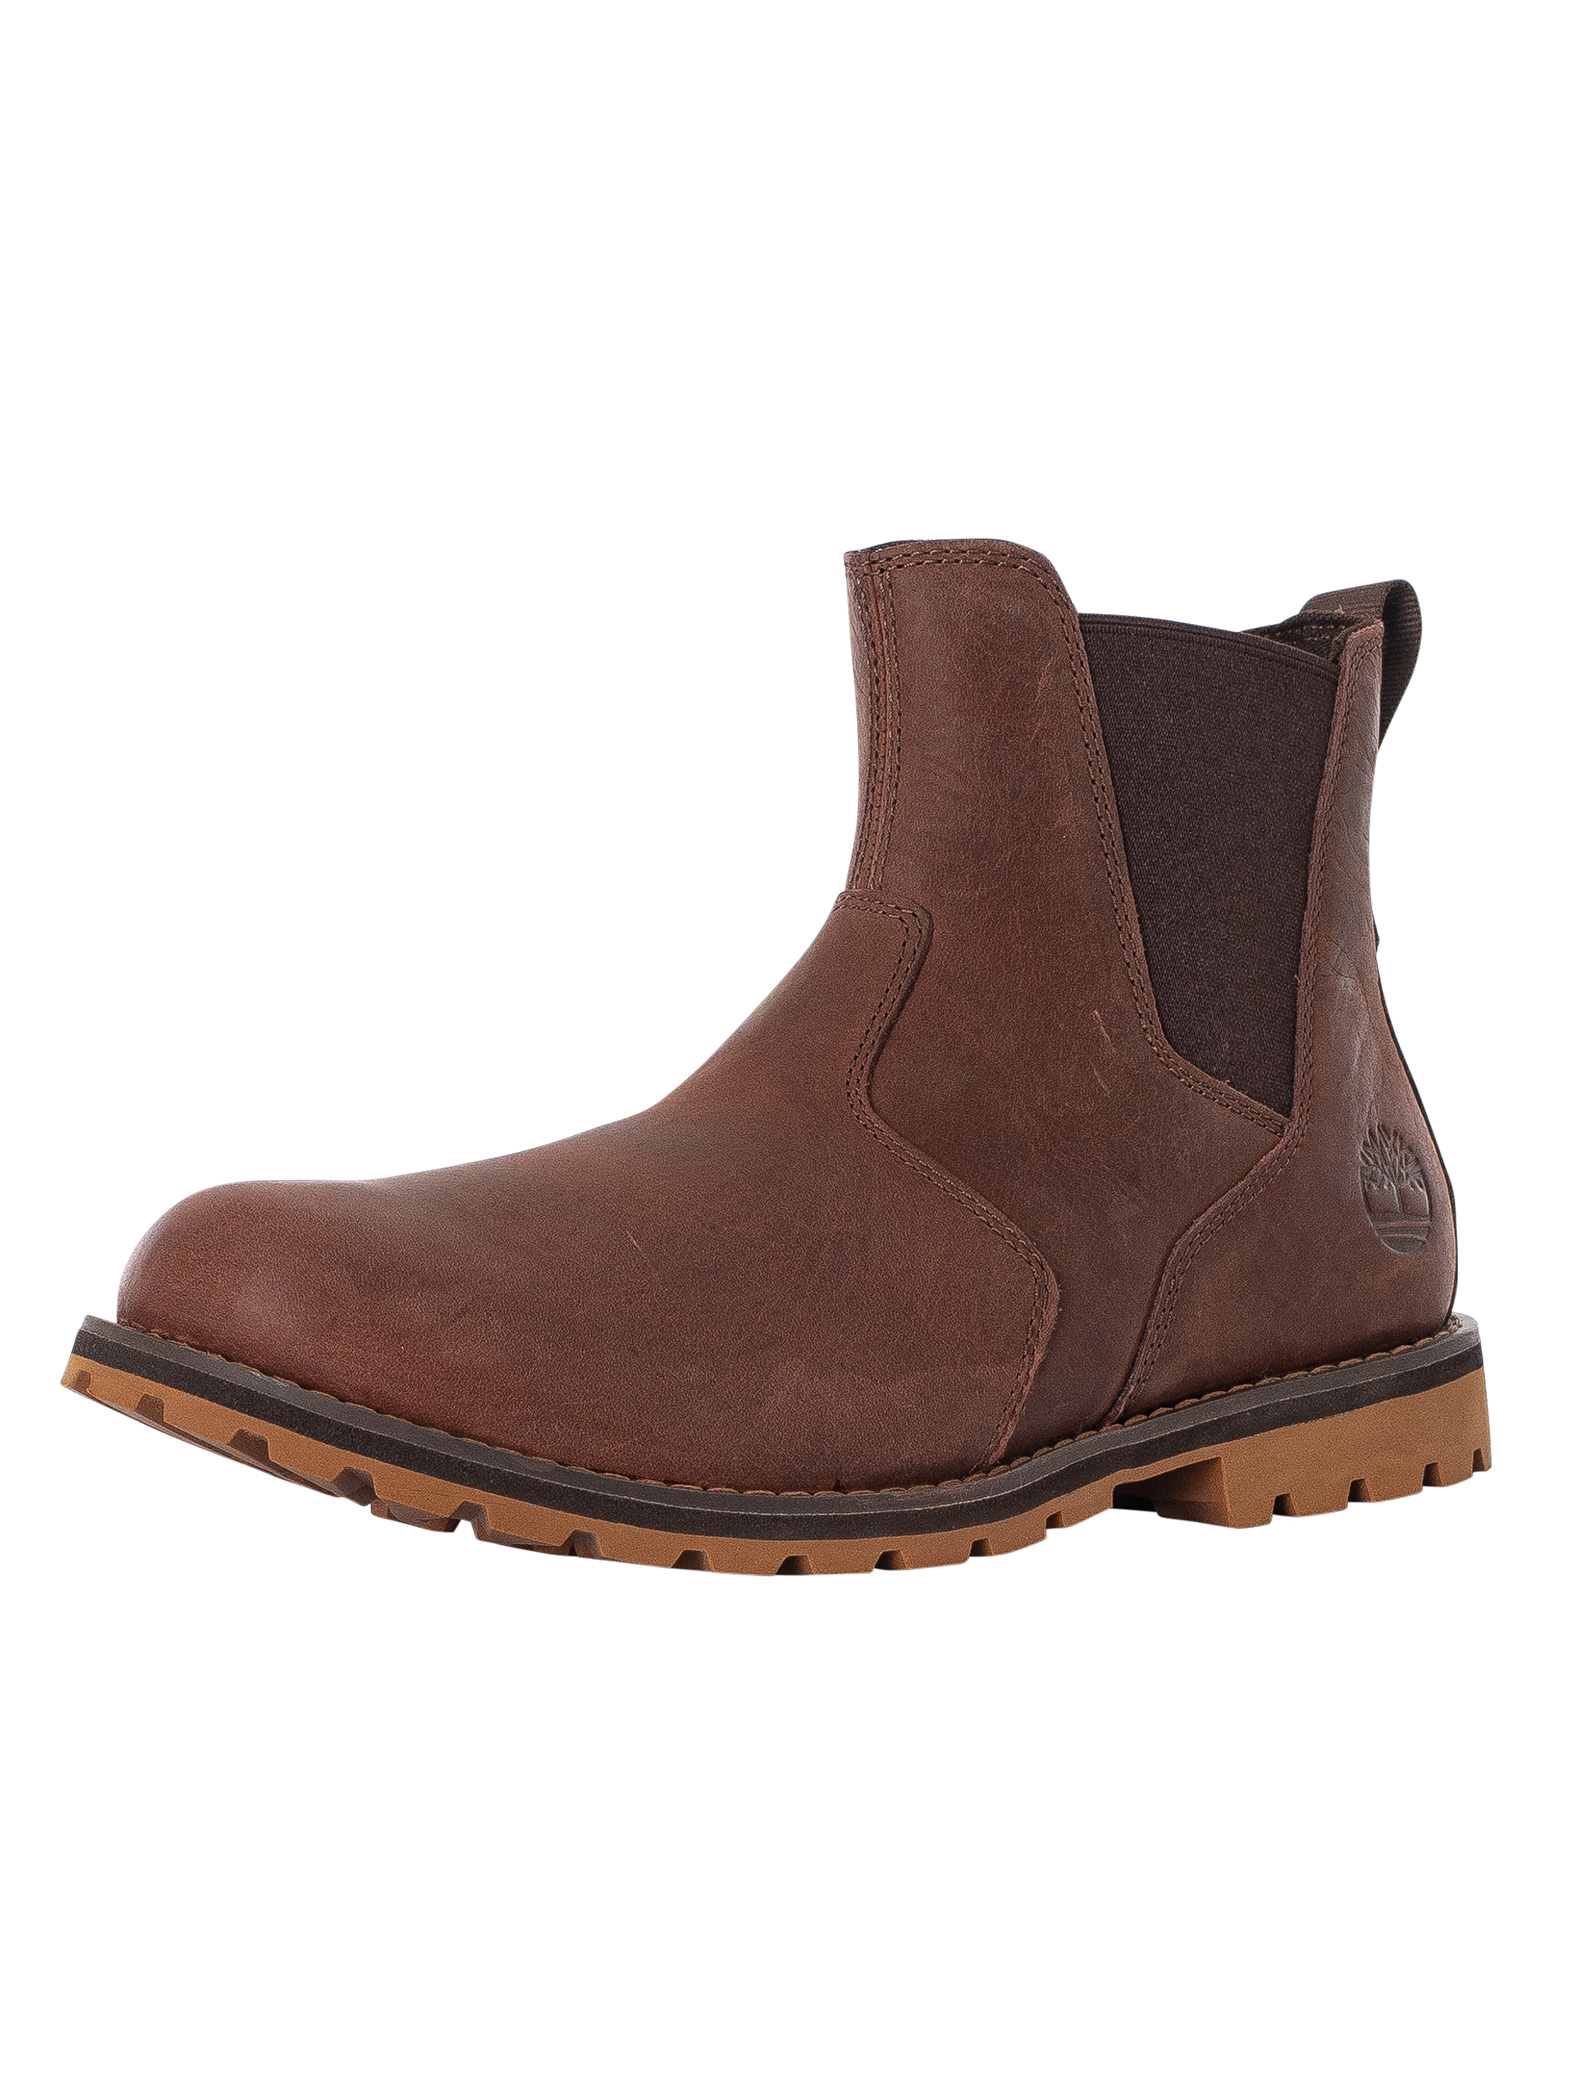 Attleboro Chelsea Boots product